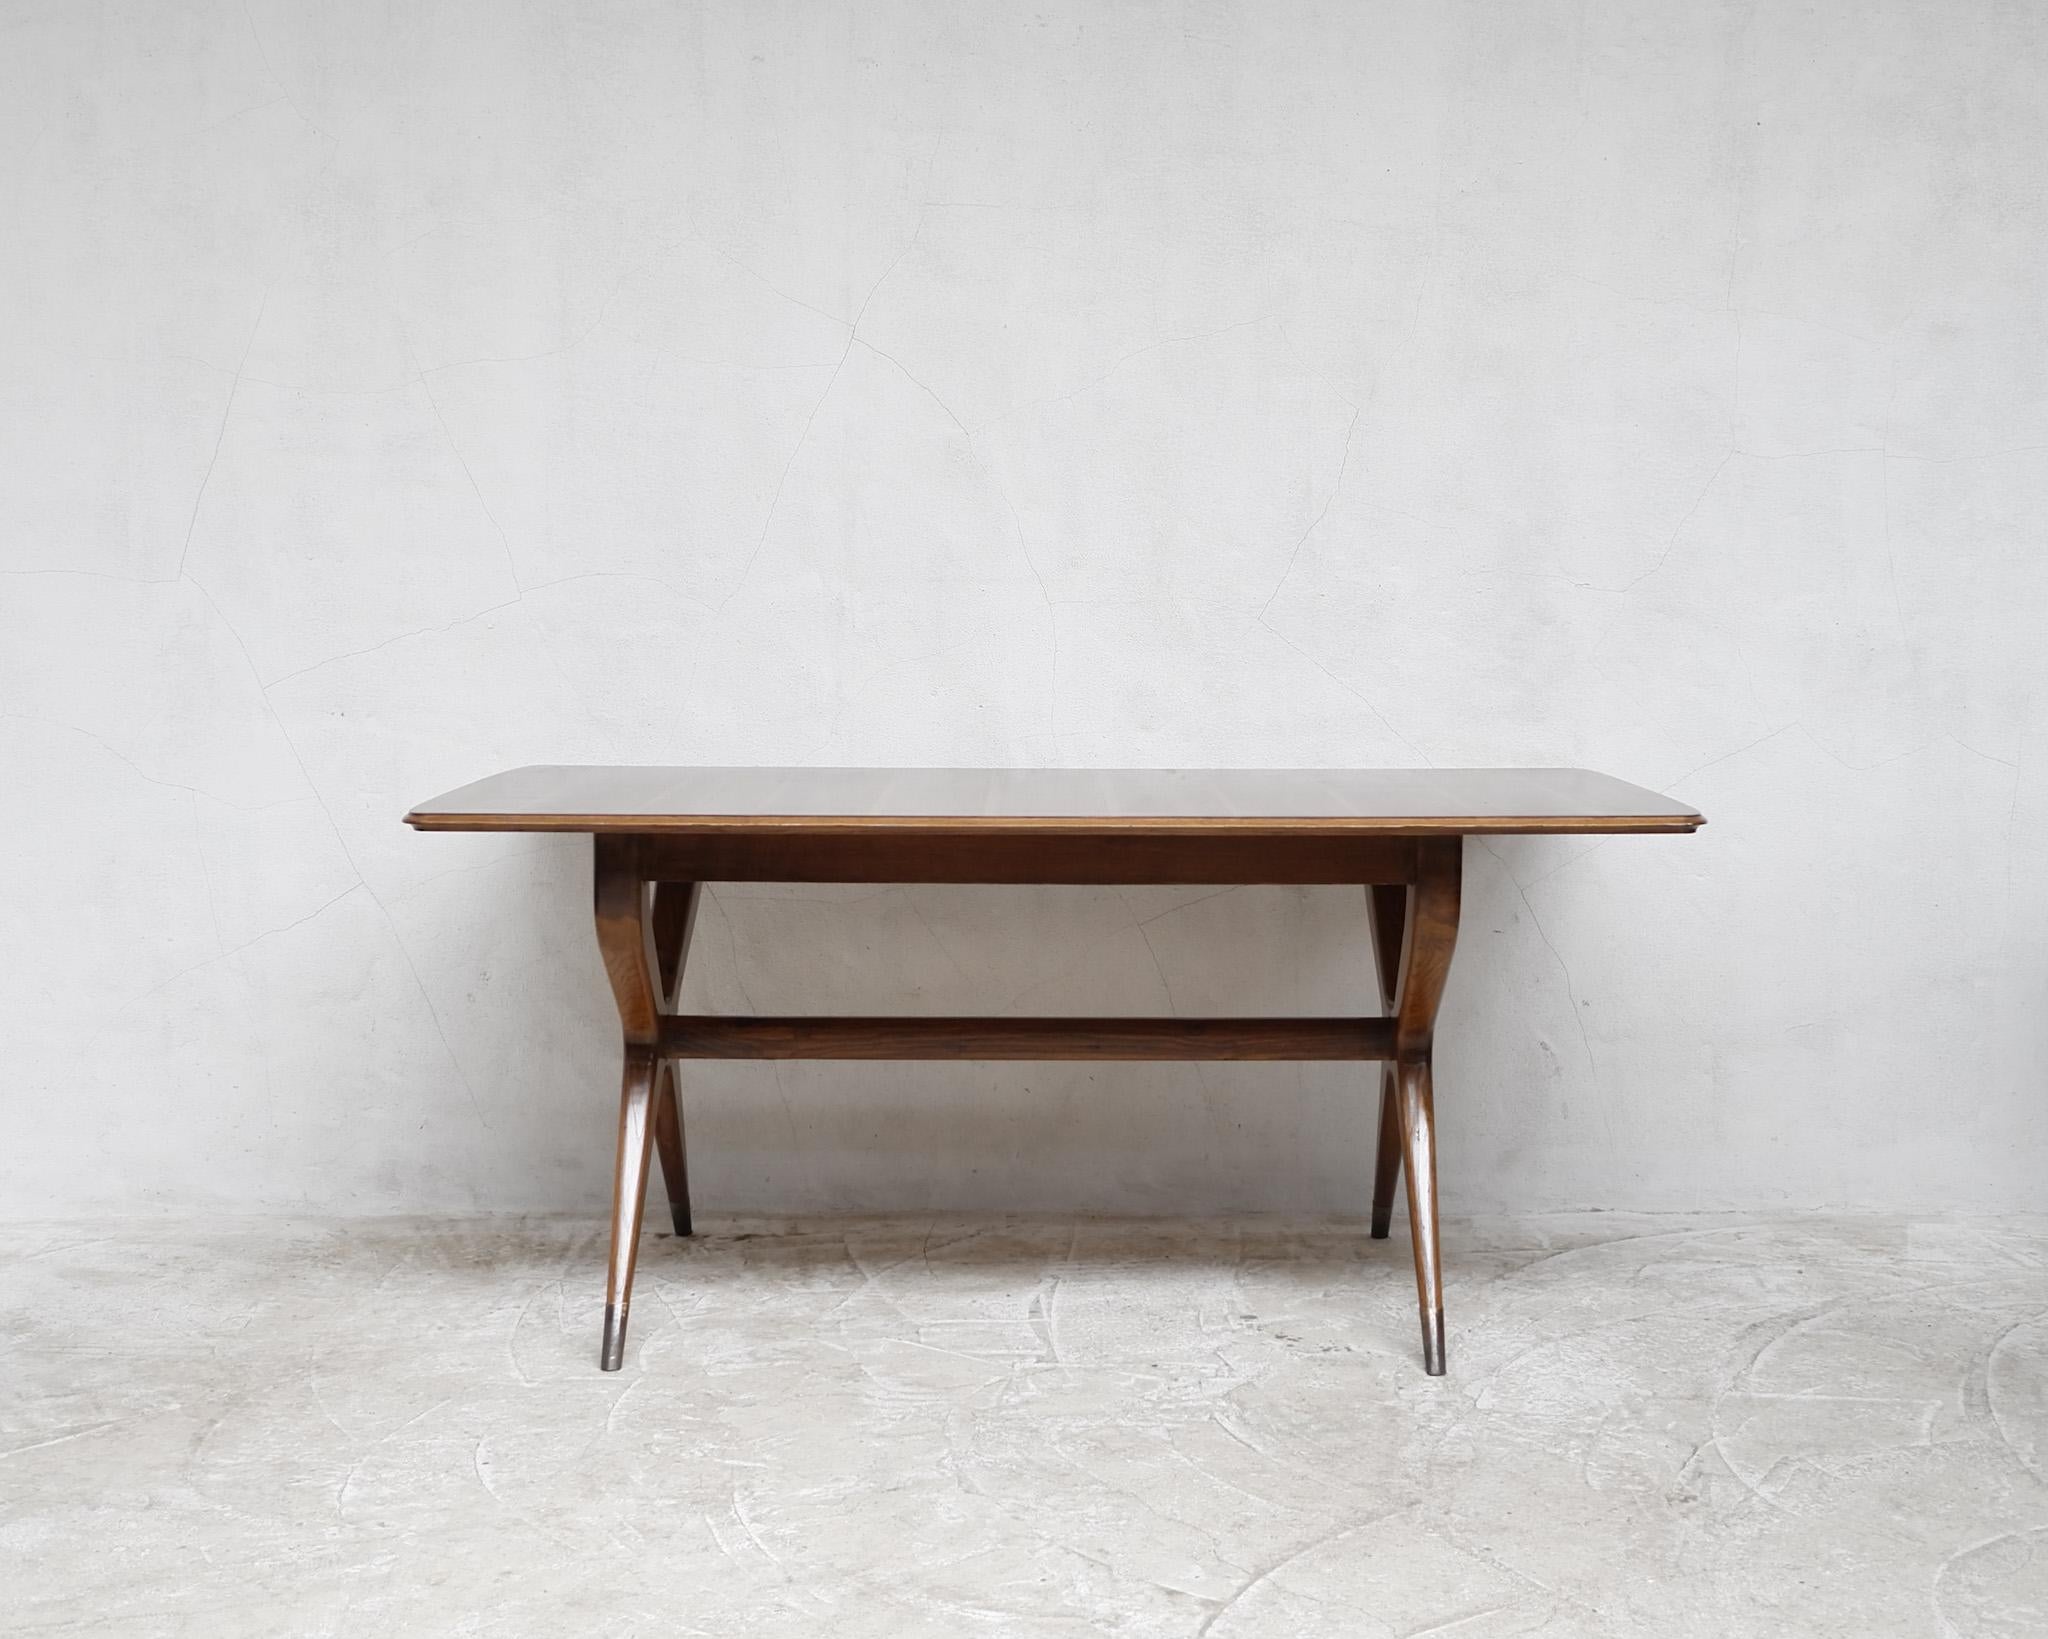 A C.1950s Italian oak dinning table/large desk in the Gio Ponti style.

Beautifully patterned veneer top on solid oak base.

Fully restored in our London workshop.

-

We offer free shipping to the USA/Canada through Fedex with this item.